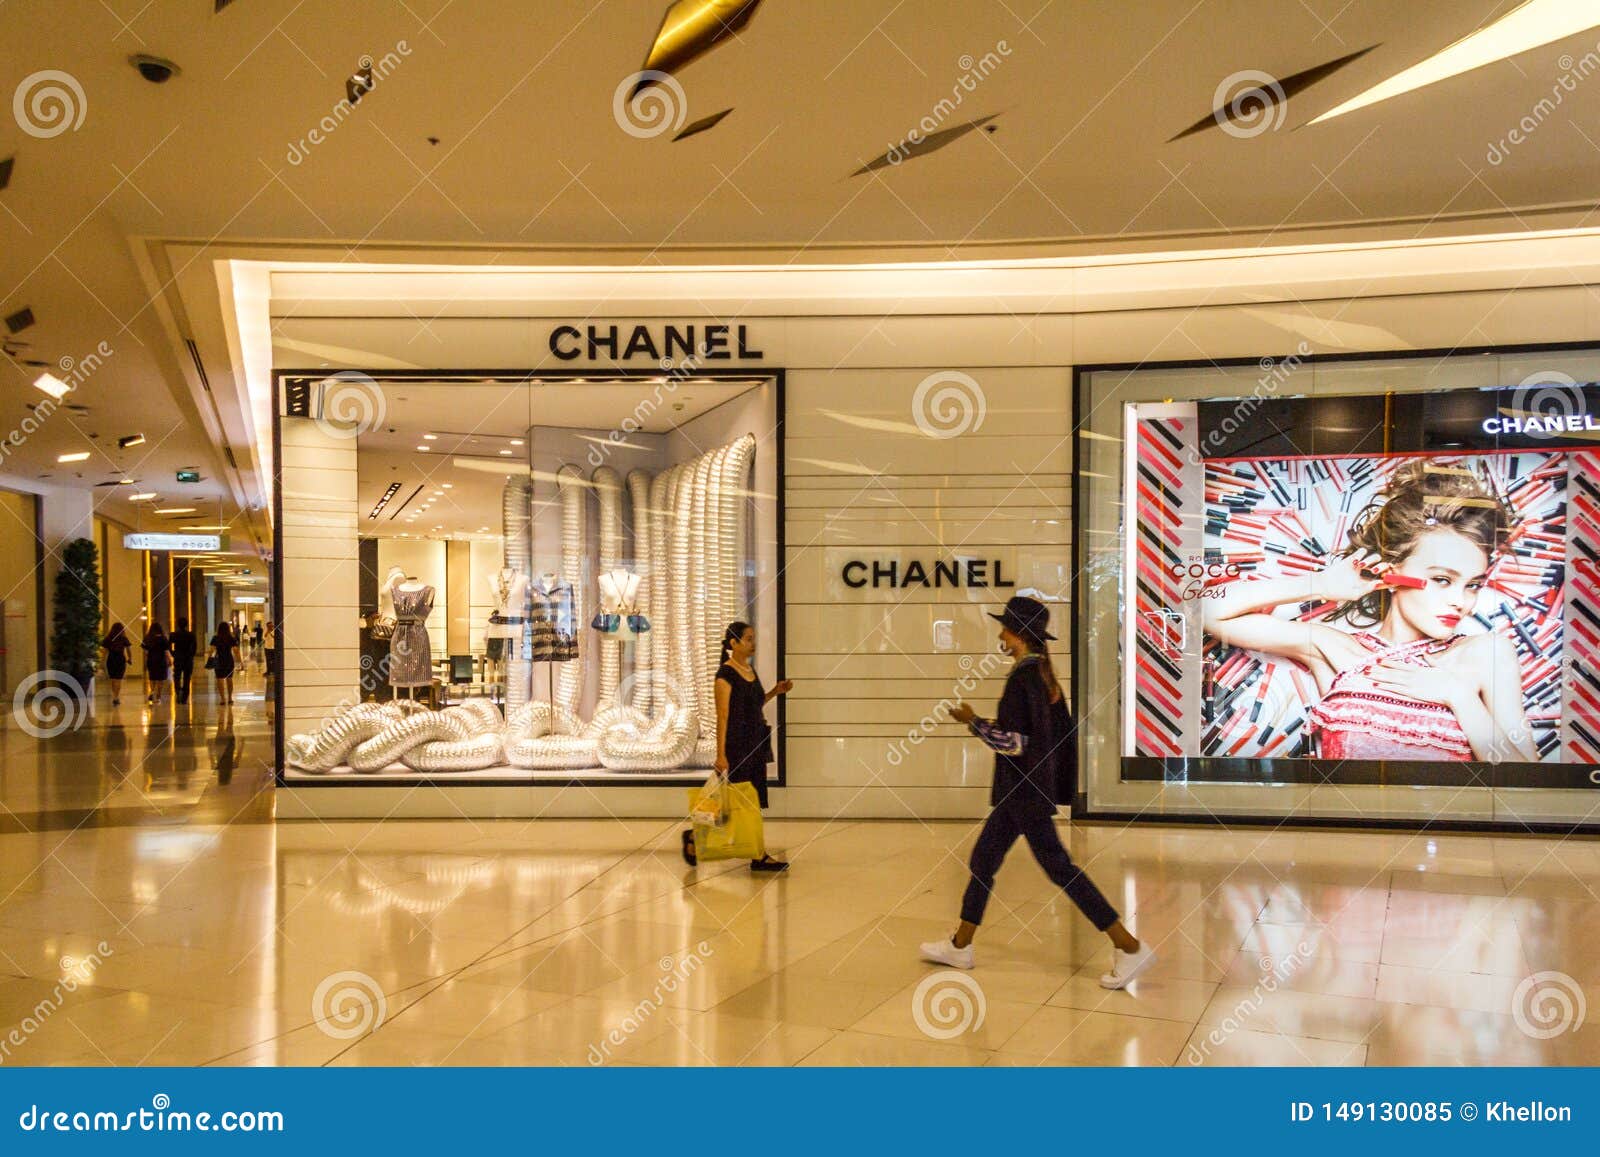 A Chanel Store in a Shopping Mall Editorial Image - Image of brands,  expensive: 149130085